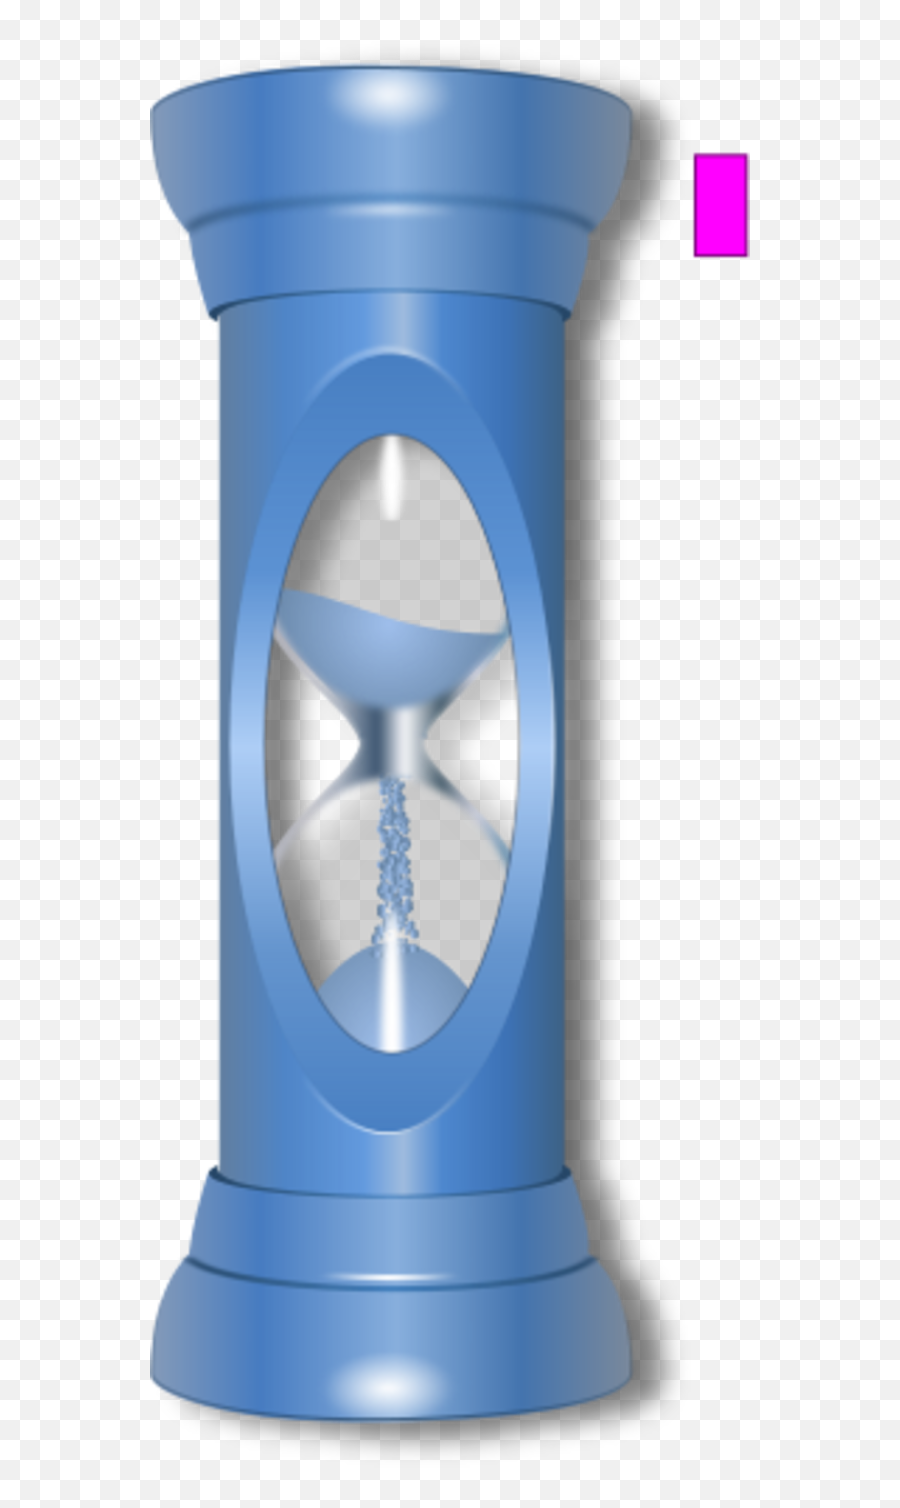 Clipart Of Hourglass Free Image - Cylinder Emoji,Hourglass Clipart